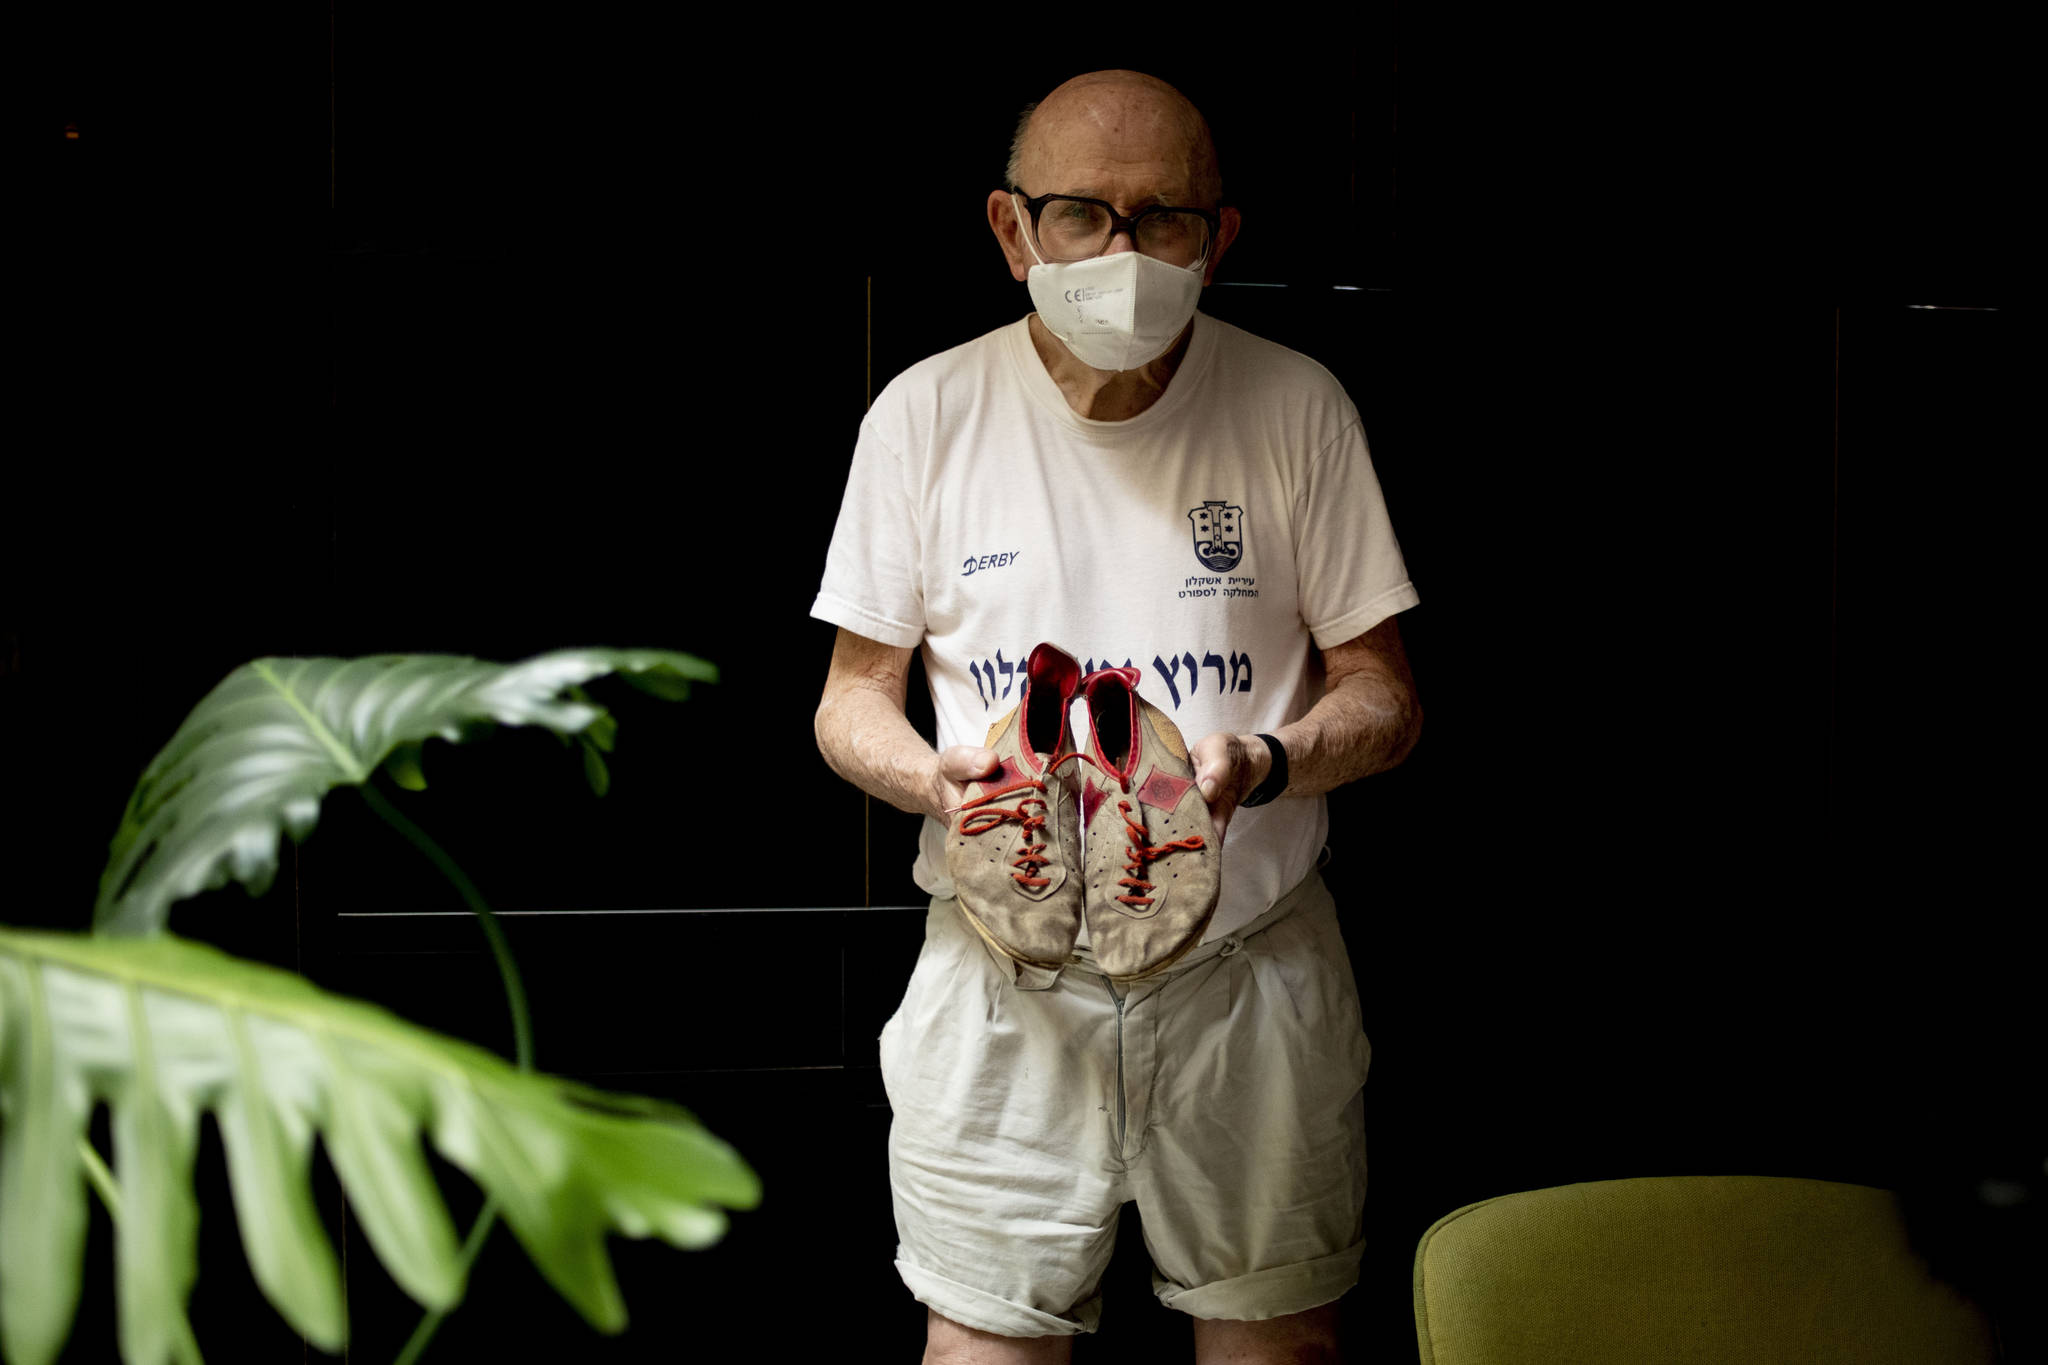 Israeli Olympic racewalker Shaul Ladany holds his 1972’s Olympic race shoes for a portrait in Omer, Israel, Sunday, July 12, 2020. In an instant, the world record holder in the 50-mile walk was thrust into one of sports’ greatest tragedies and a seminal moment in modern history _ the kidnapping and massacre of his fellow Israeli team members at the 1972 Munich Olympics. The killing shocked the world, gave the Palestinian cause an audience and ushered in a new era of global terrorism. Ladany, a Holocaust survivor, the lessons still linger. He says it taught him to “never be afraid” but become “more careful.”(AP Photo / Ariel Schalit)